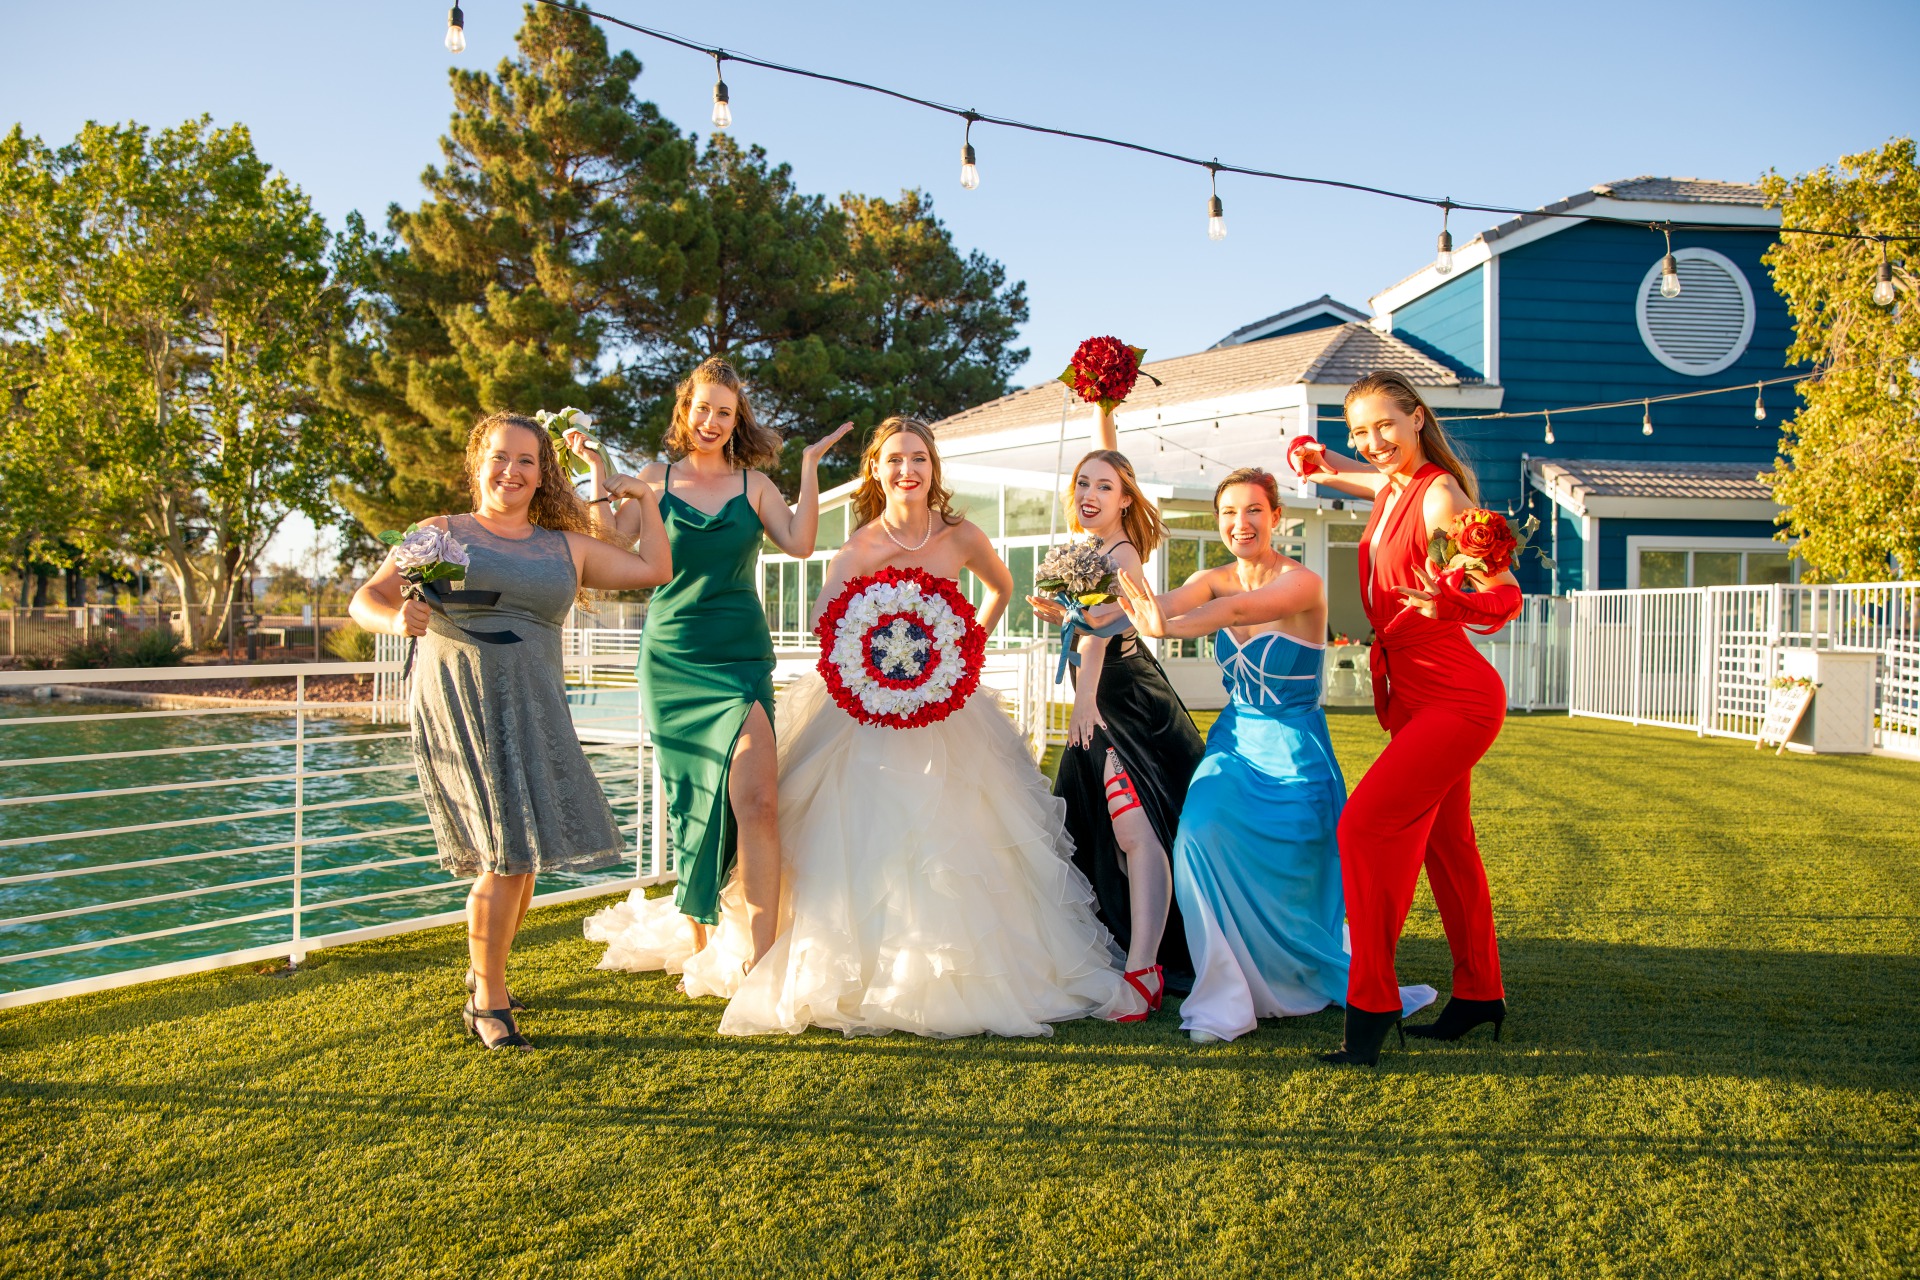 Bride and bridesmaids posing in their avengers inspired dresses. Comic book wedding inspiration